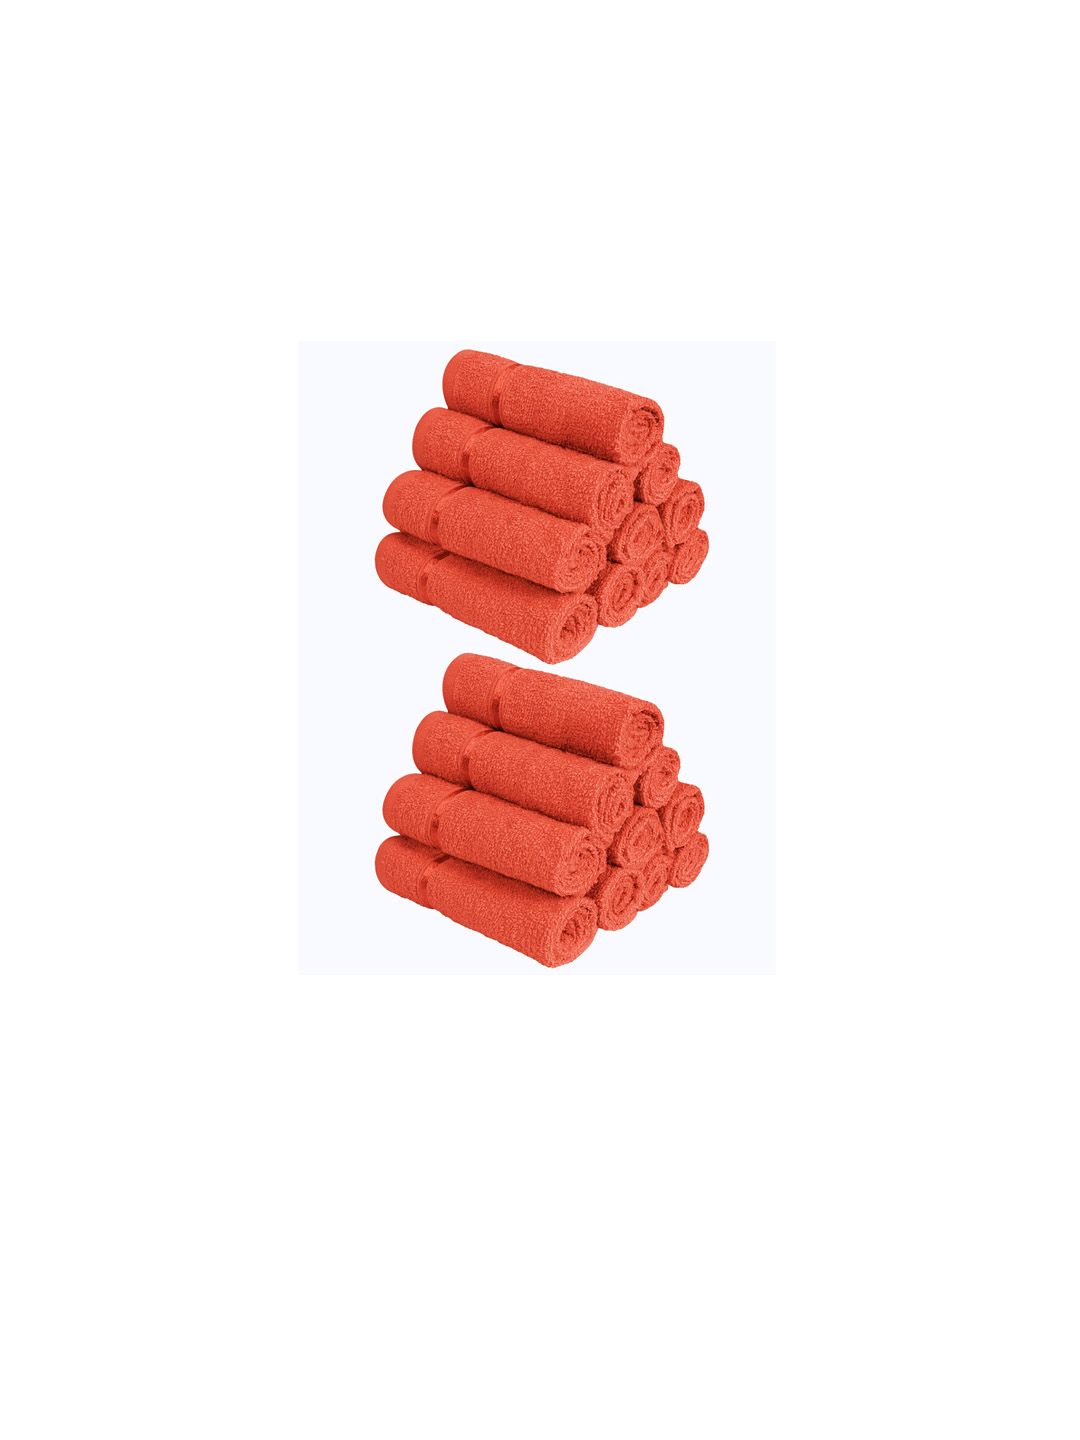 Story@home Set Of 20 Orange Solid Pure Cotton 450 GSM Face Towels Price in India